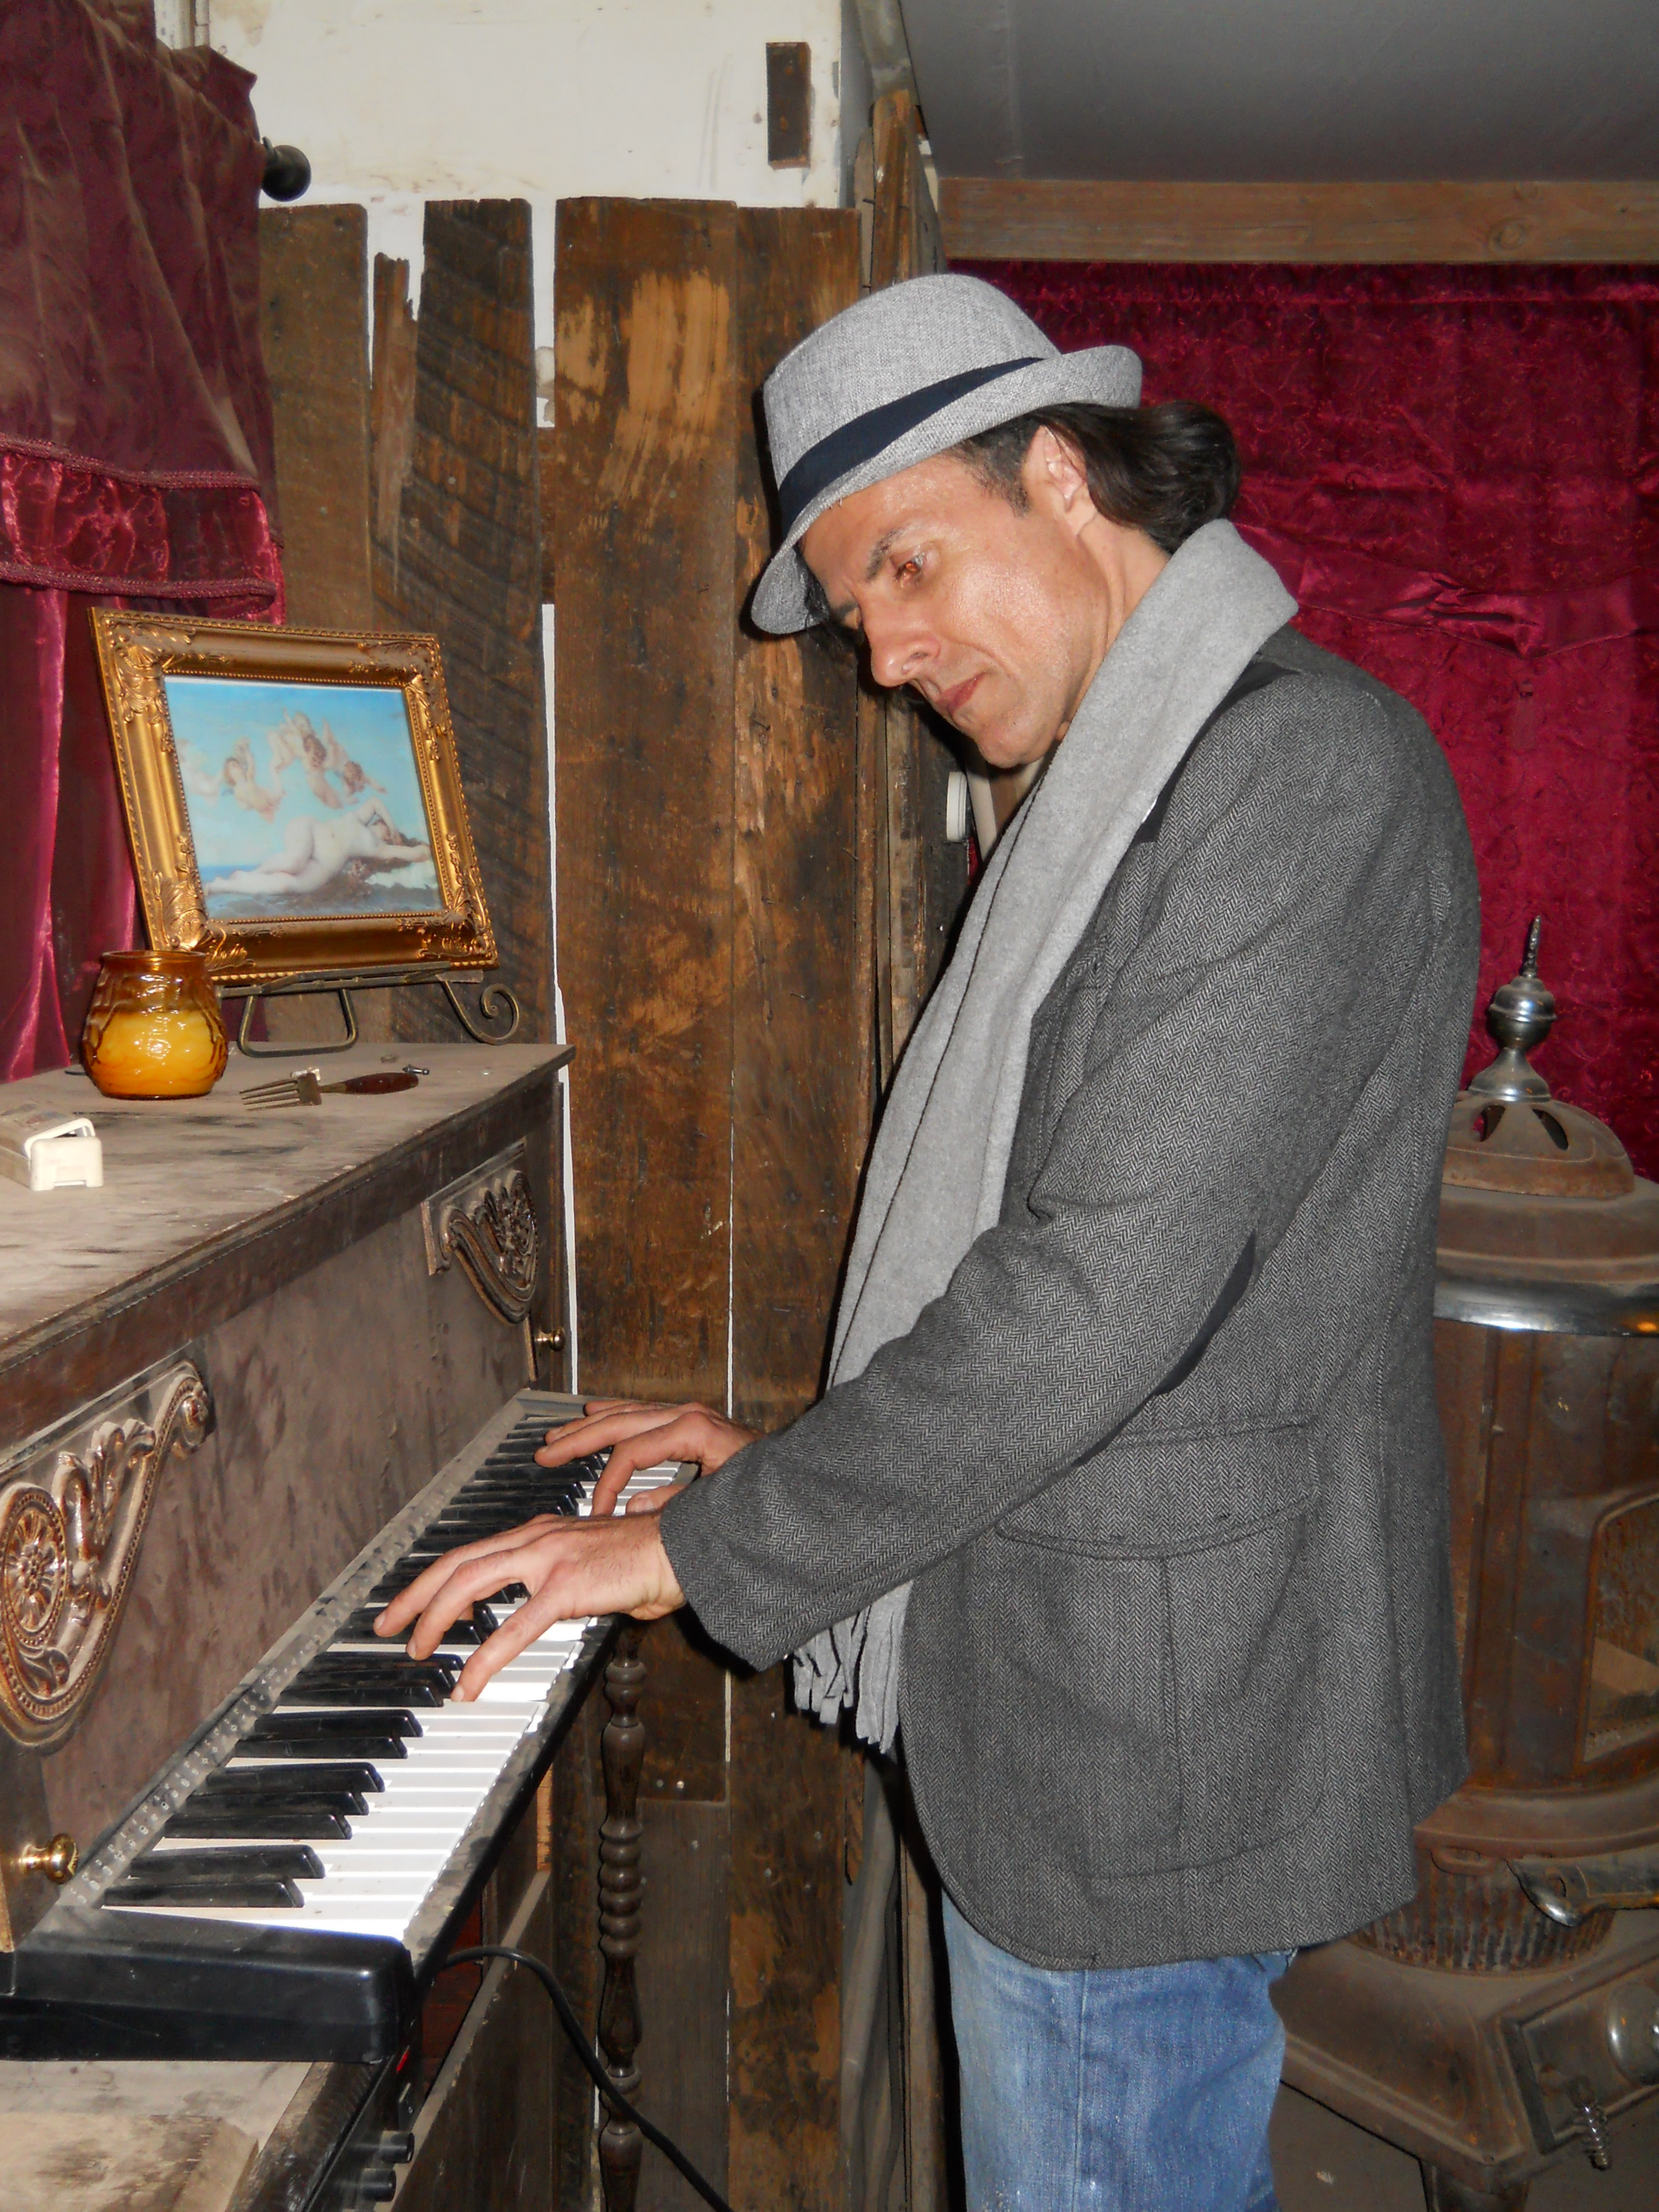 Actor writer director Philippe Durand playing piano in Doc Holliday's poker and faro room